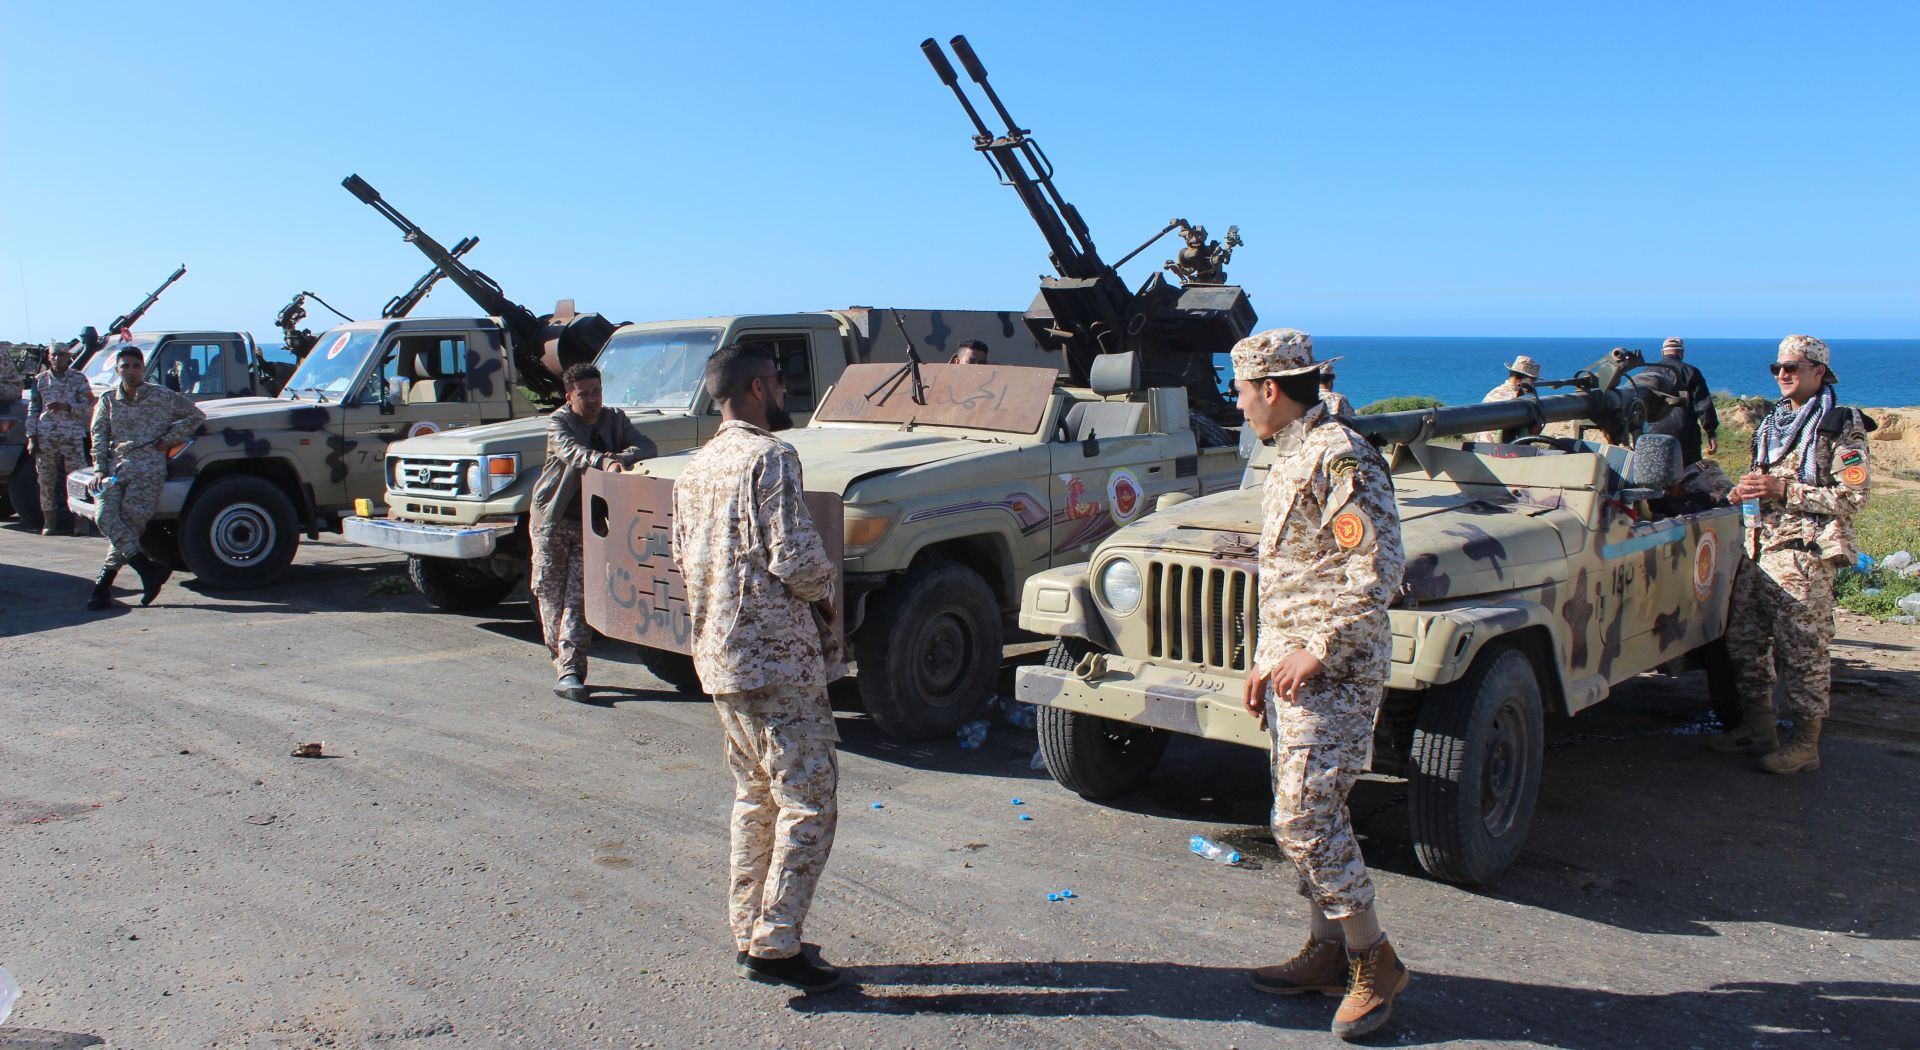 epa07489302 Vehicles and militants, reportedly from the Misrata militia, gather to join Tripoli forces, in Tripoli, Libya, 06 April 2019. According to reports, commander of the Libyan National Army (LNA) Khalifa Haftar ordered Libyan forces loyal to him to take the capital Tripoli, held by a UN-backed unity government, sparking fears of further escalation in the country.  EPA/STRINGER